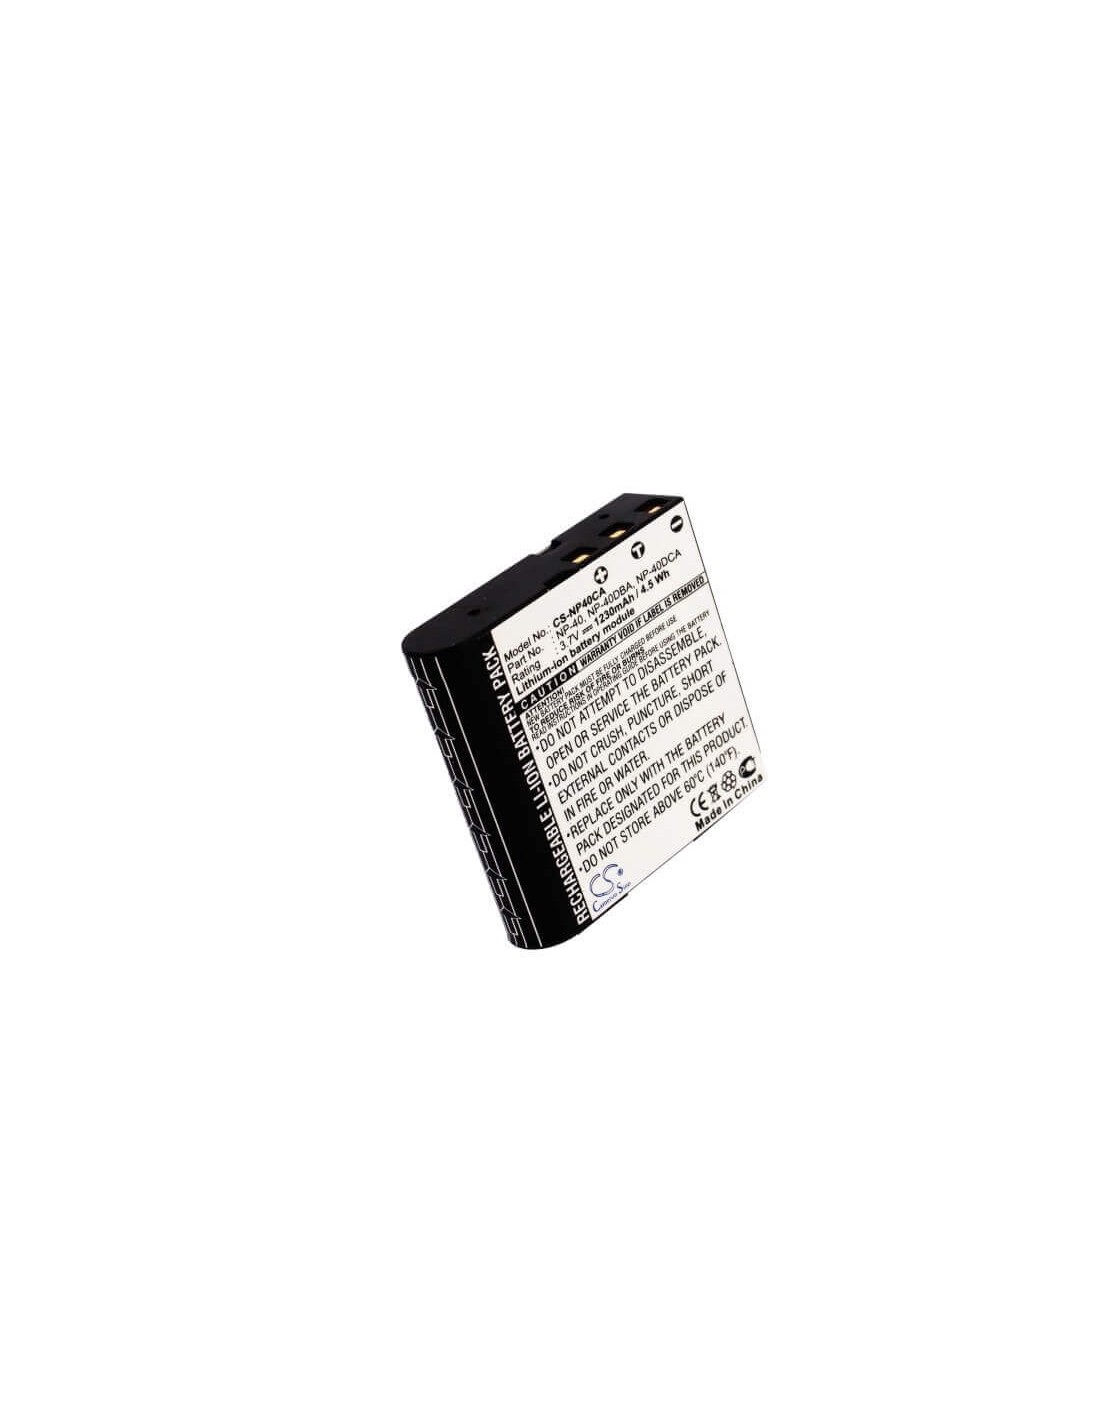 Battery for Rollei Movieline Sd50 3.7V, 1230mAh - 4.55Wh